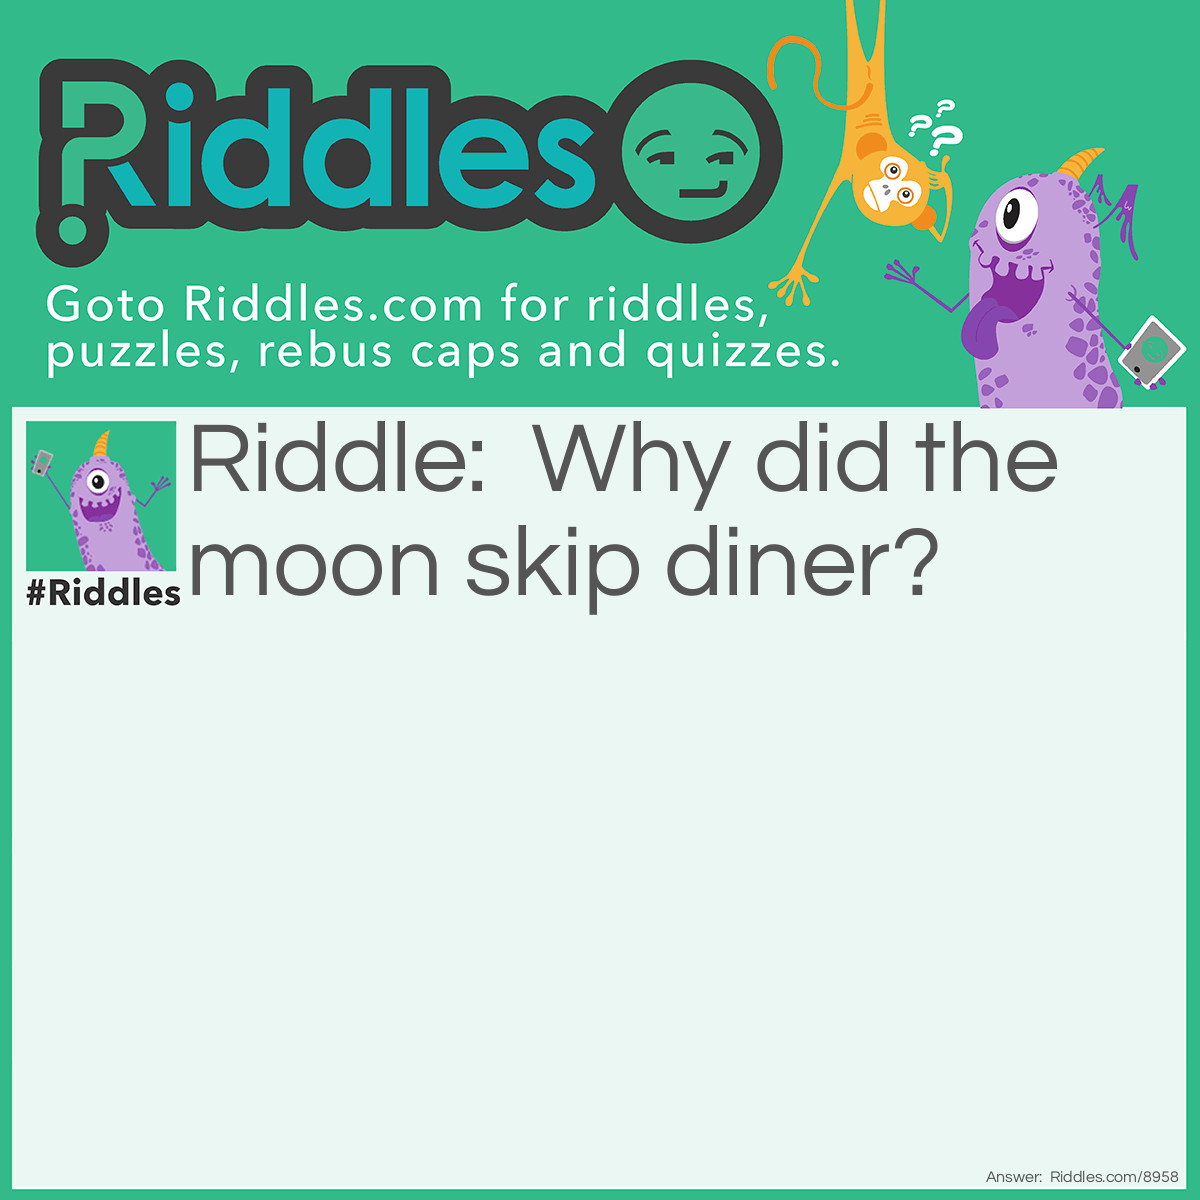 Riddle: Why did the moon skip diner? Answer: Because it was full.